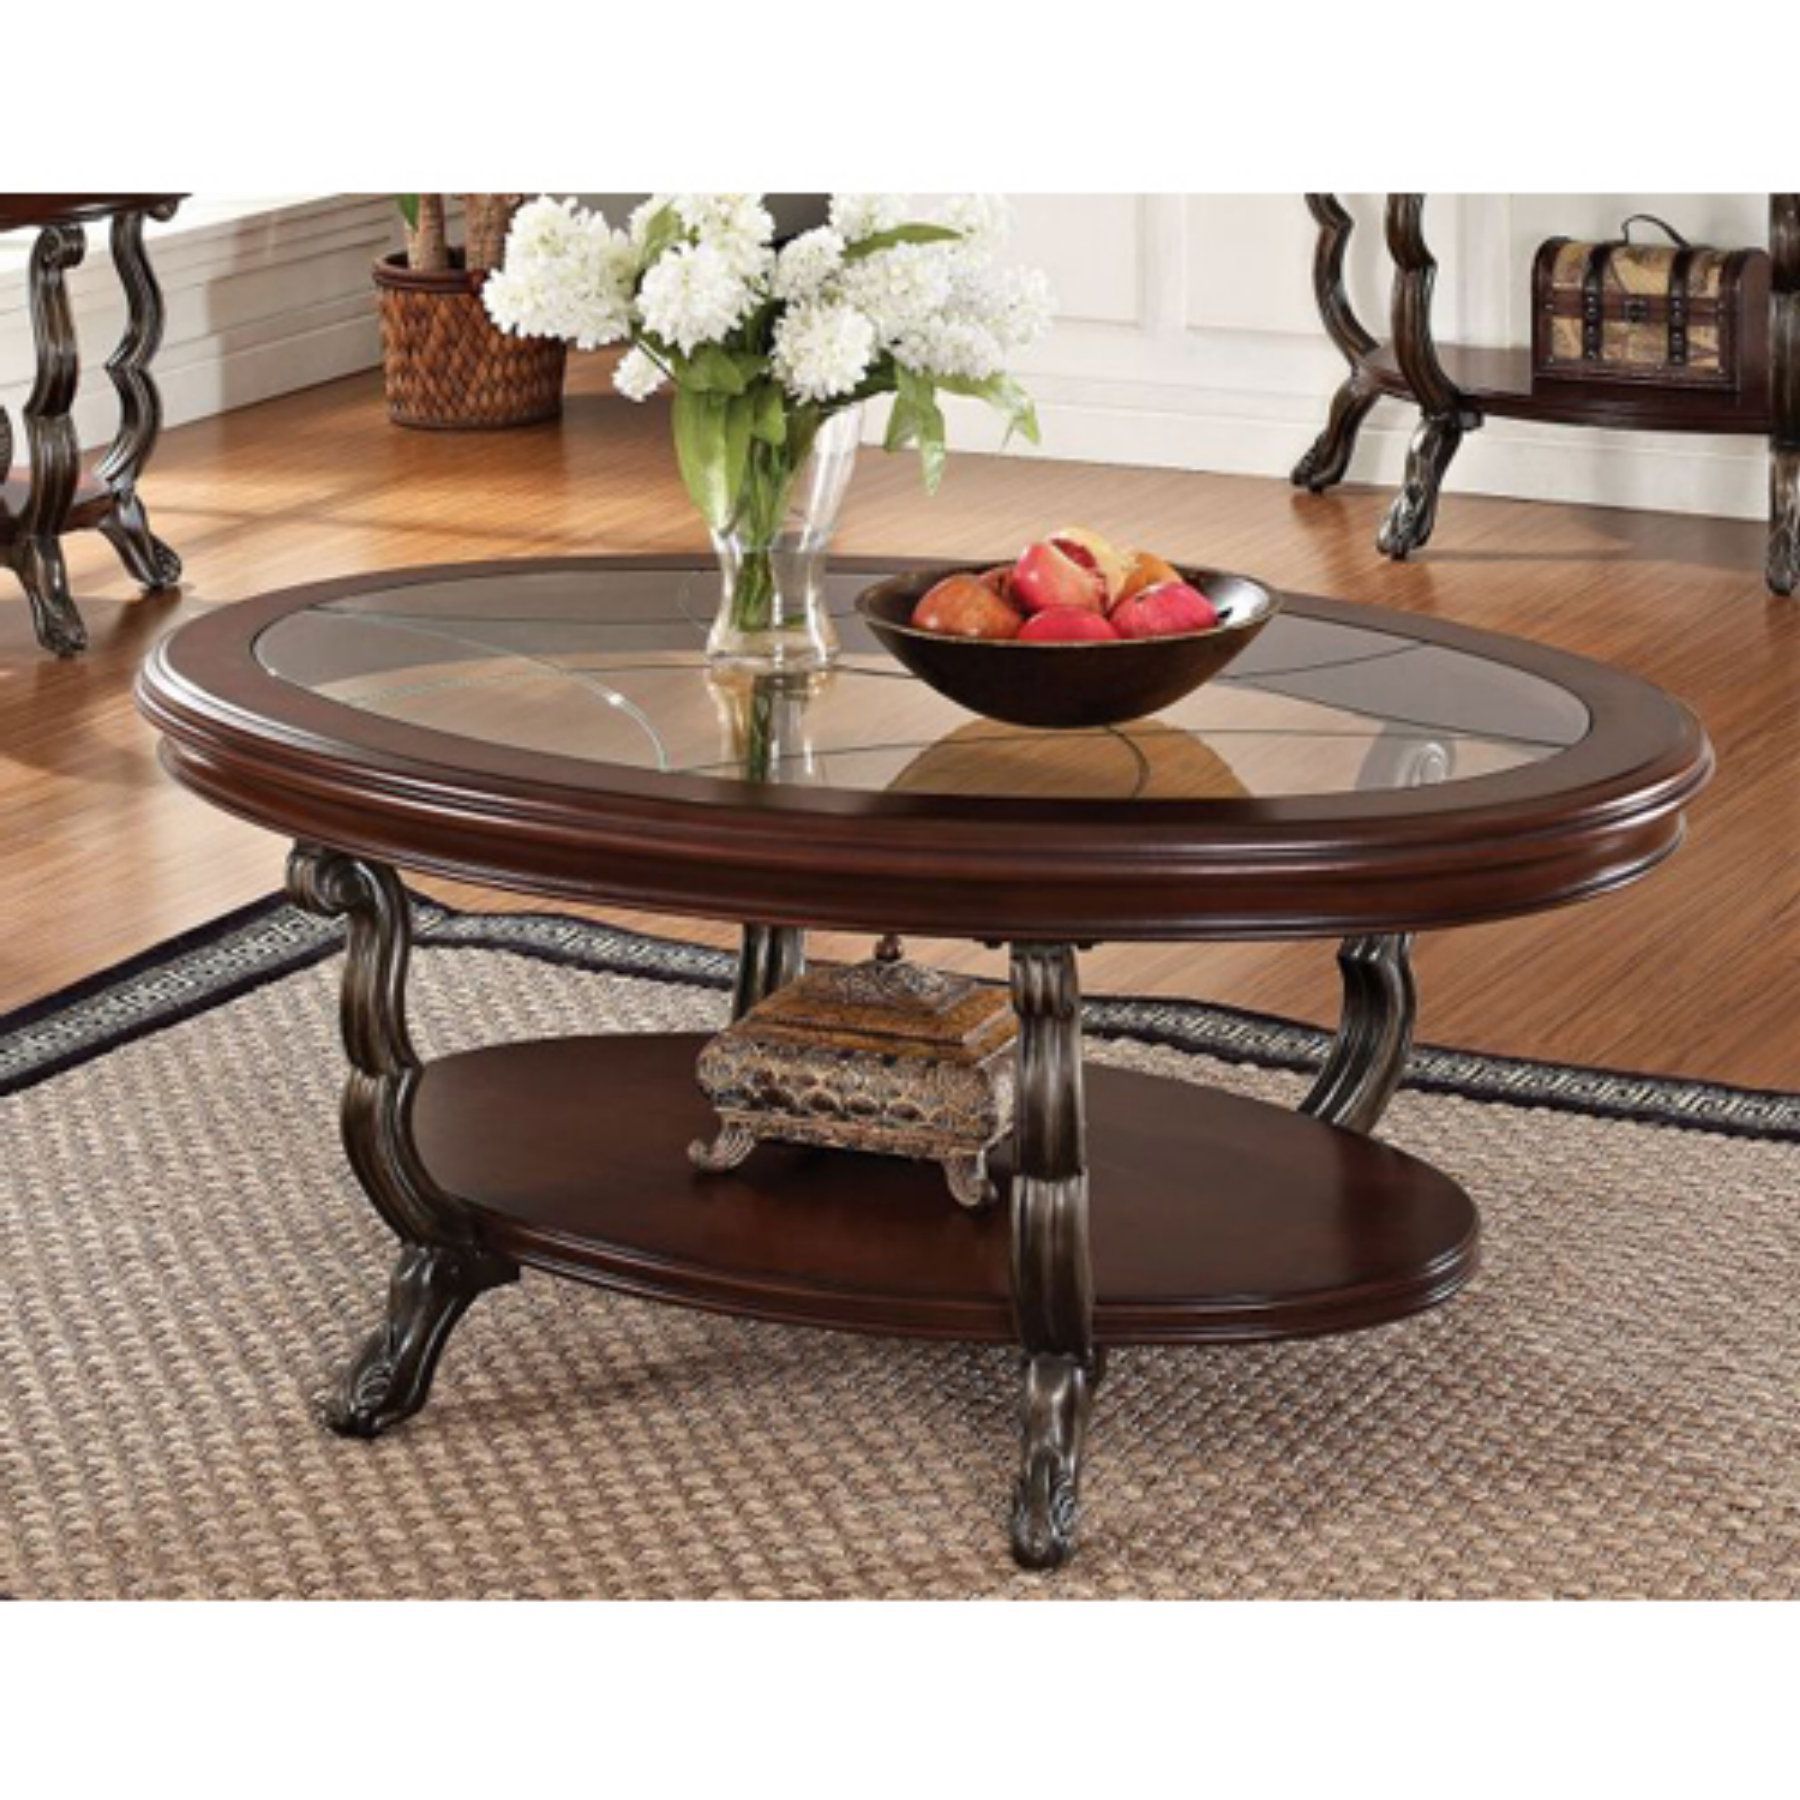 2020 Cohler Traditional Brown Cherry Oval Coffee Tables Within Pin On Ashley Furniture (View 7 of 20)